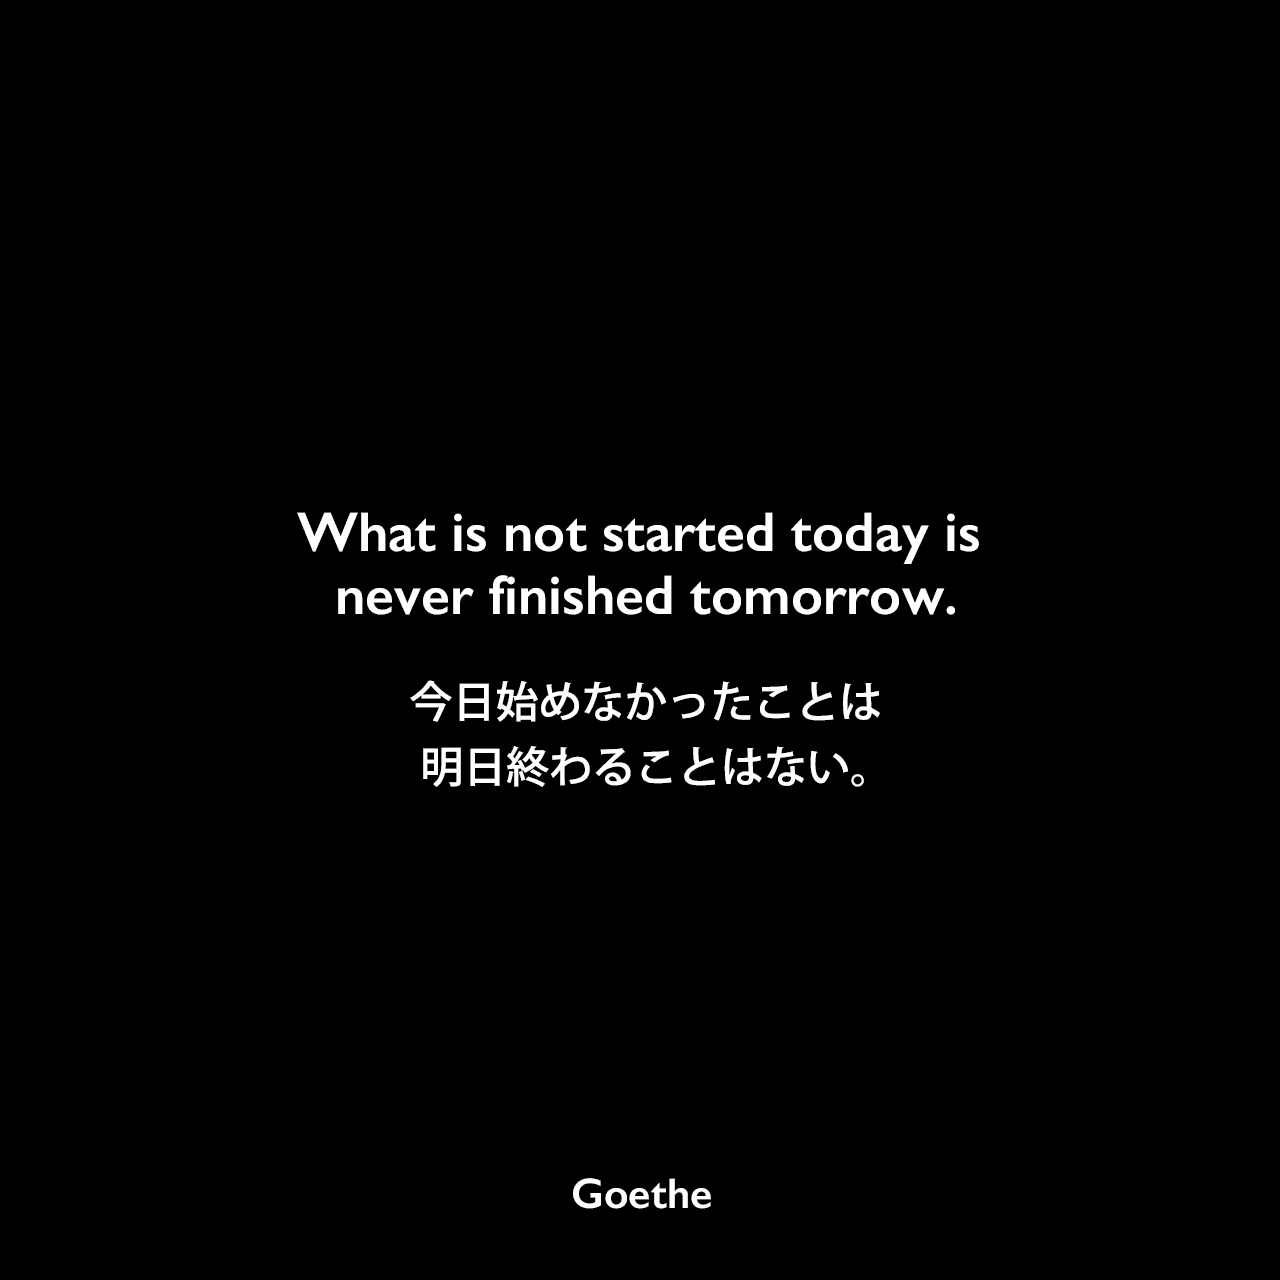 What is not started today is never finished tomorrow.今日始めなかったことは、明日終わることはない。